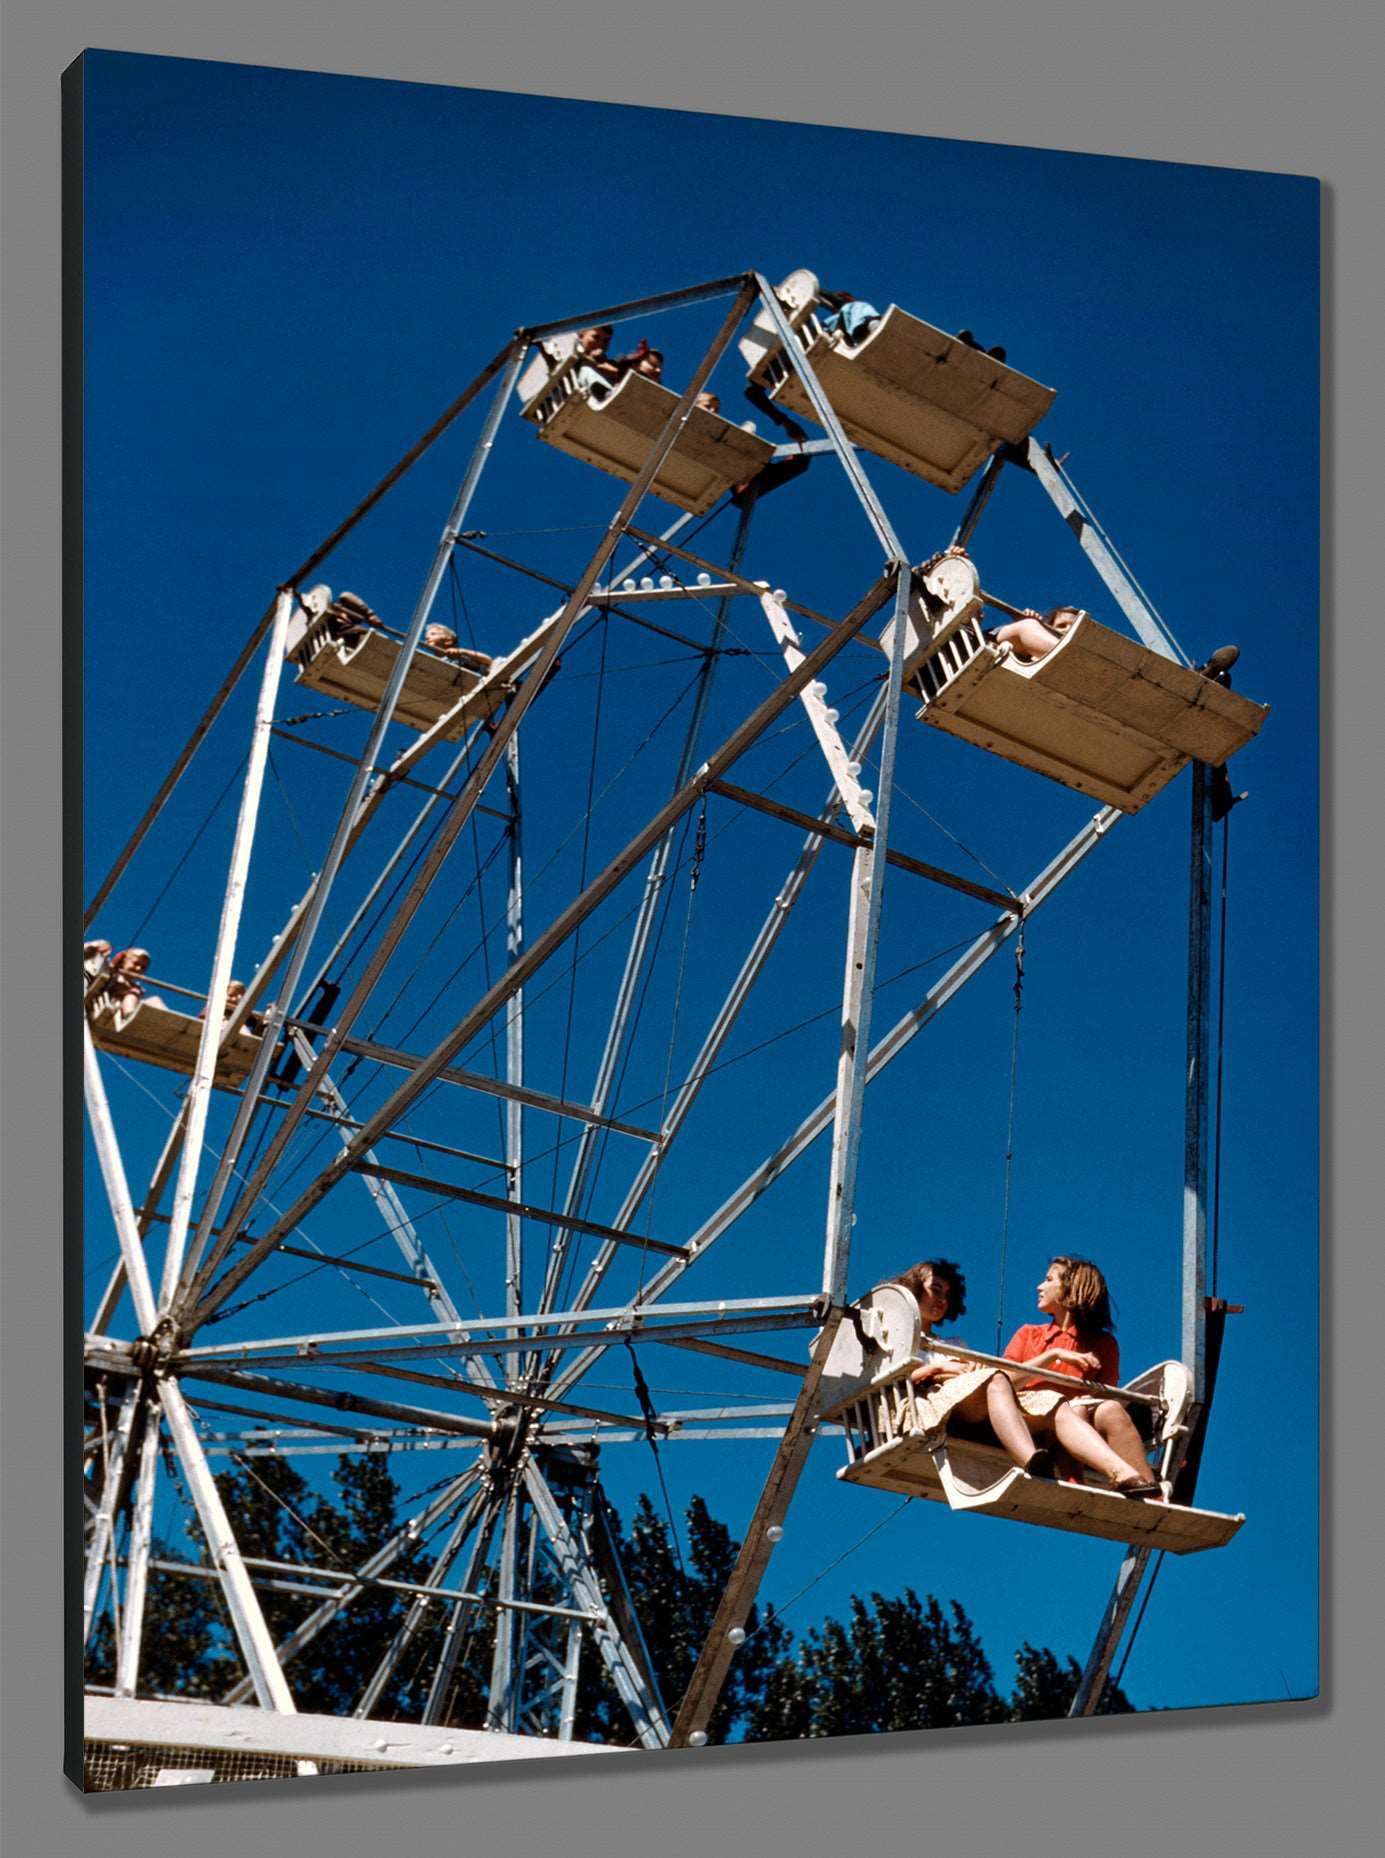 A print on canvas of vintage photography featuring a couples on a Ferris Wheel